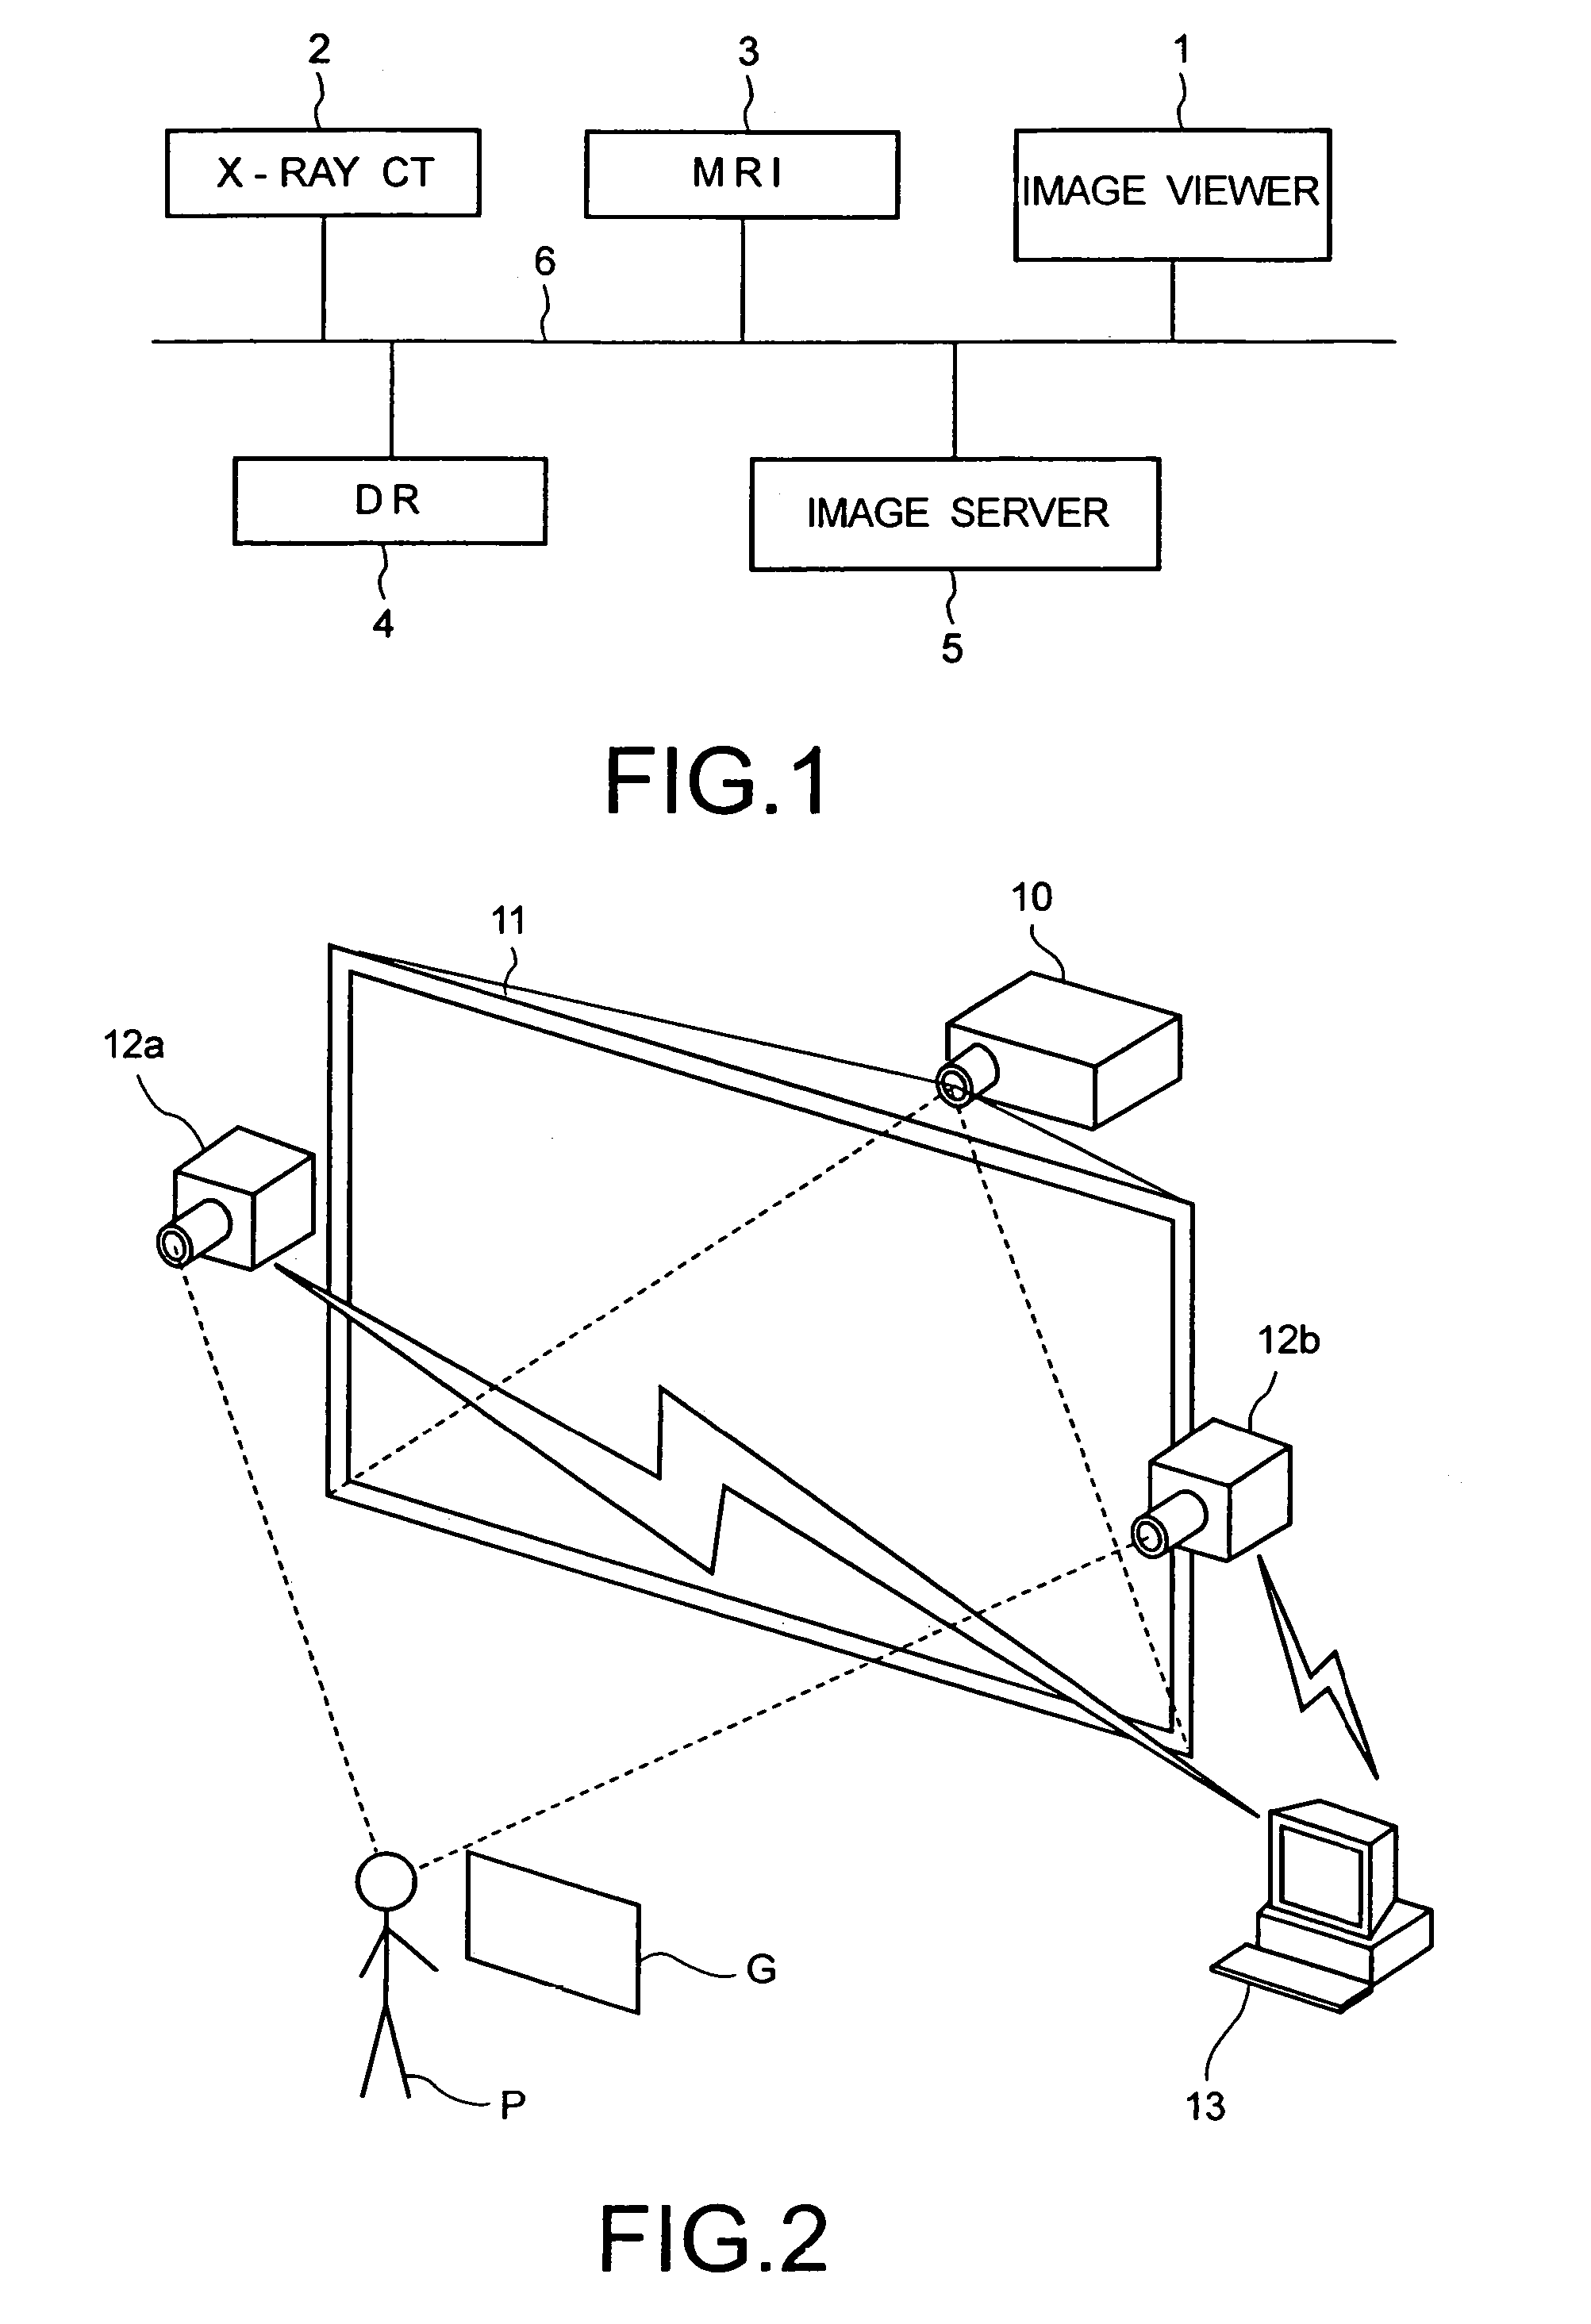 Operation recognition system enabling operator to give instruction without device operation